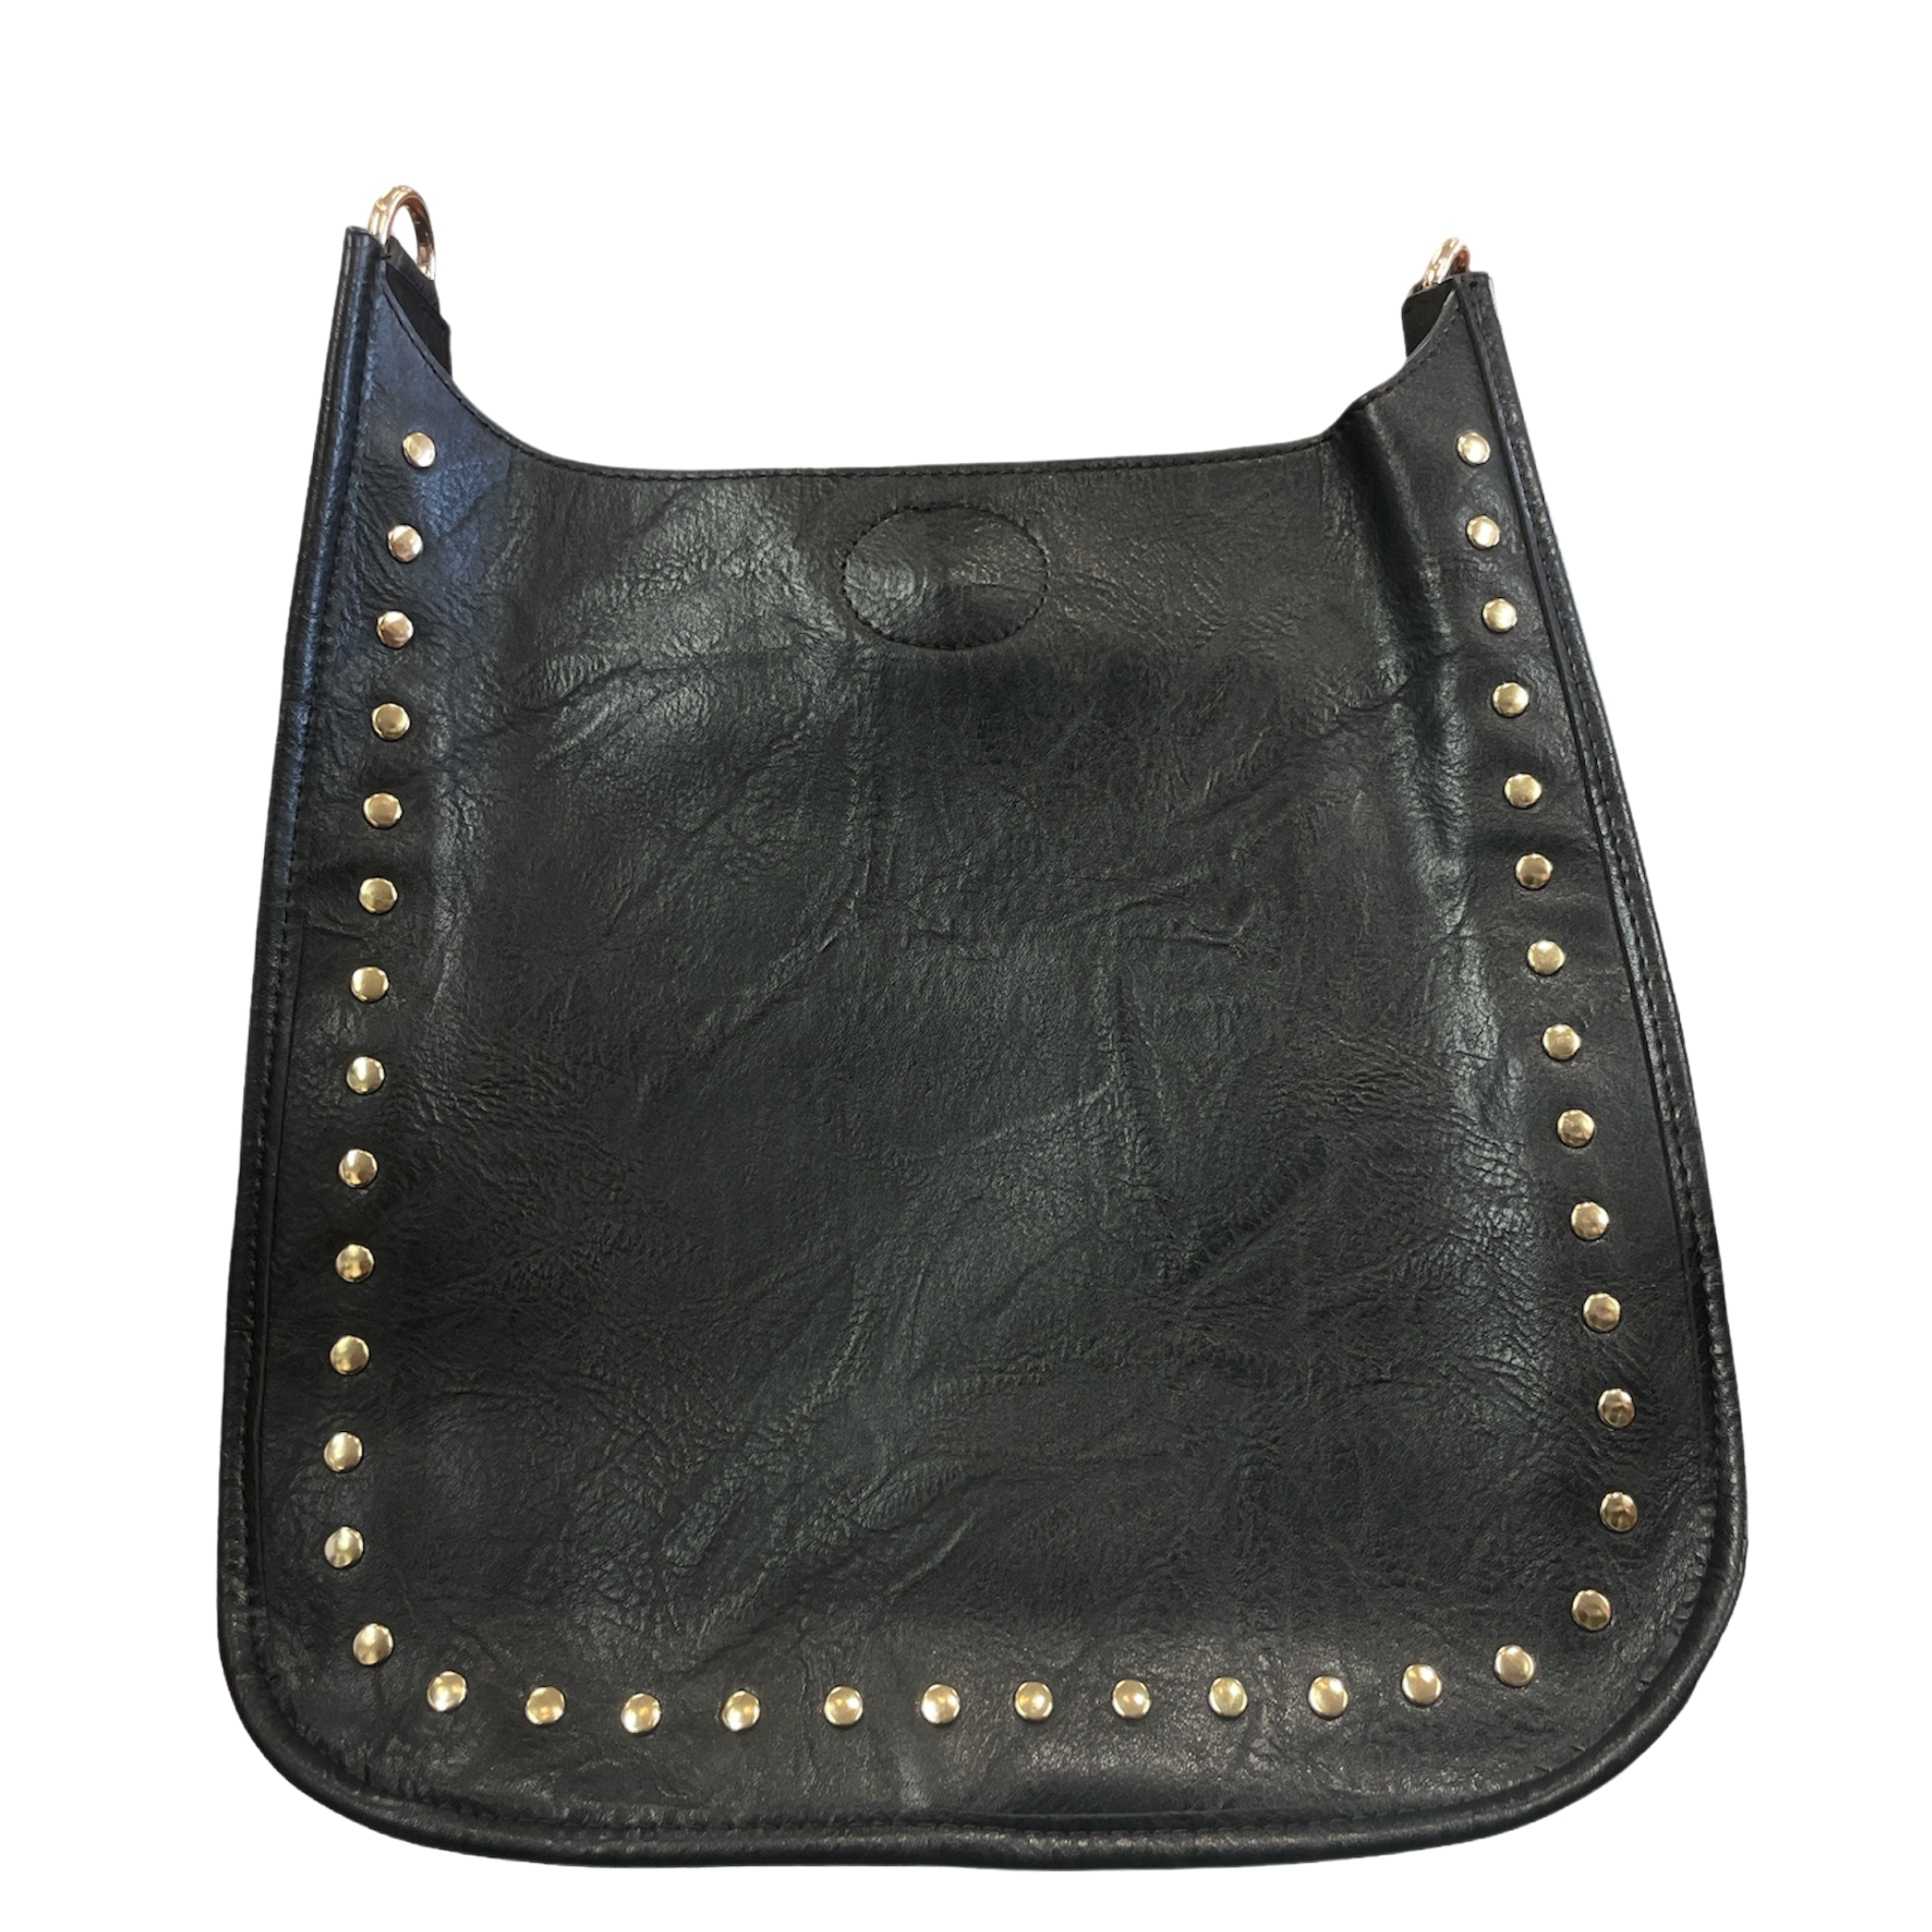 Ahdorned distressed classic vegan leather messanger w studs